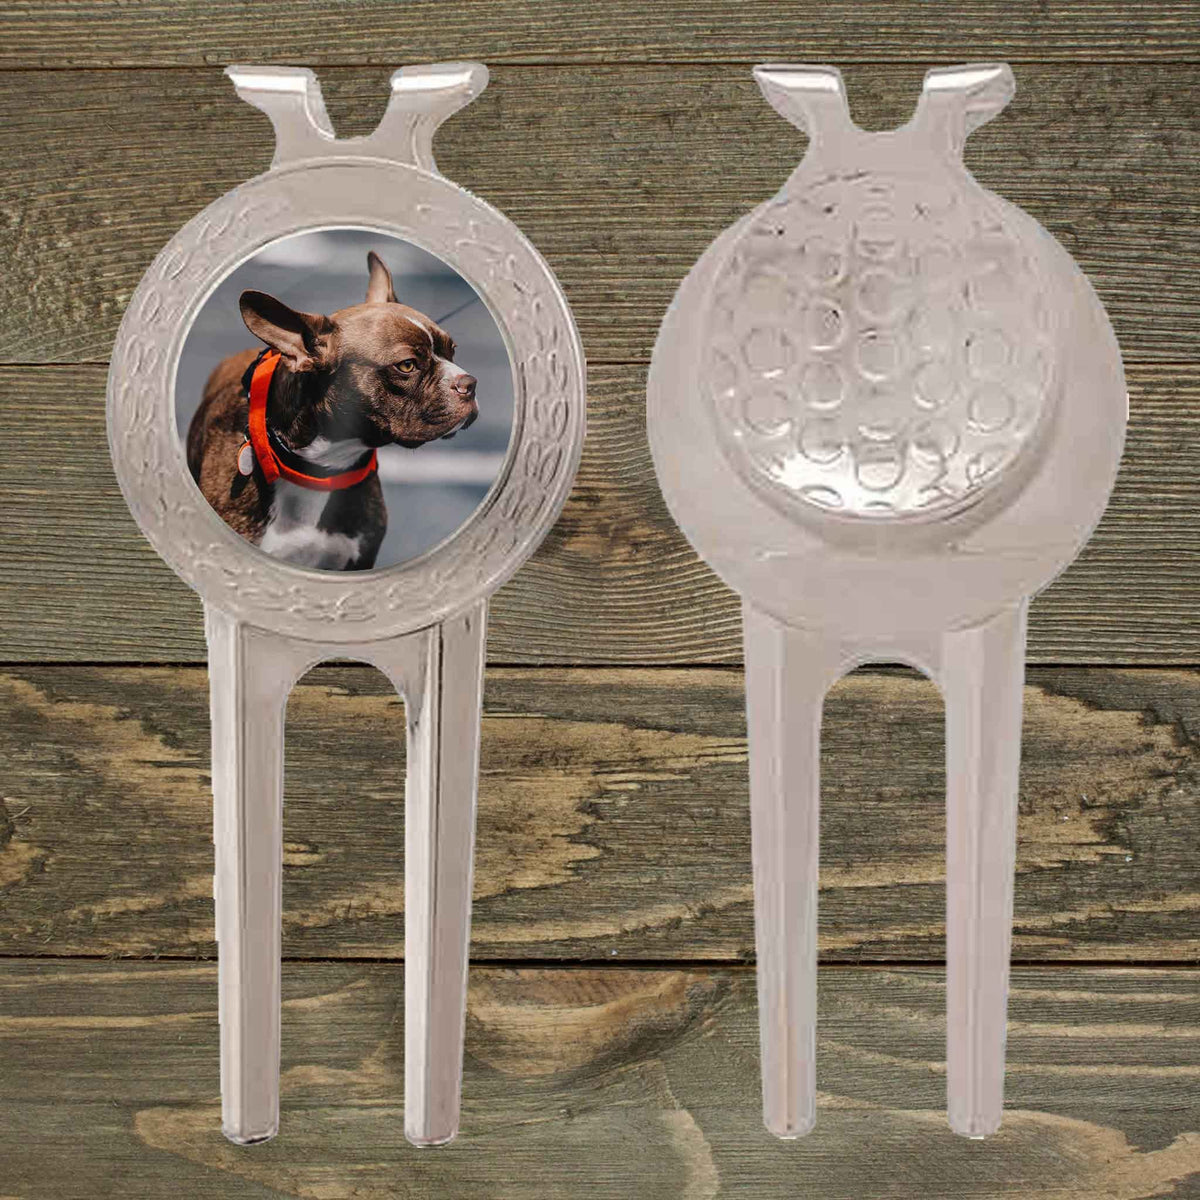 Personalized Divot Repair Tool | Golf Accessories | Golf Gifts | Custom Photo Pet